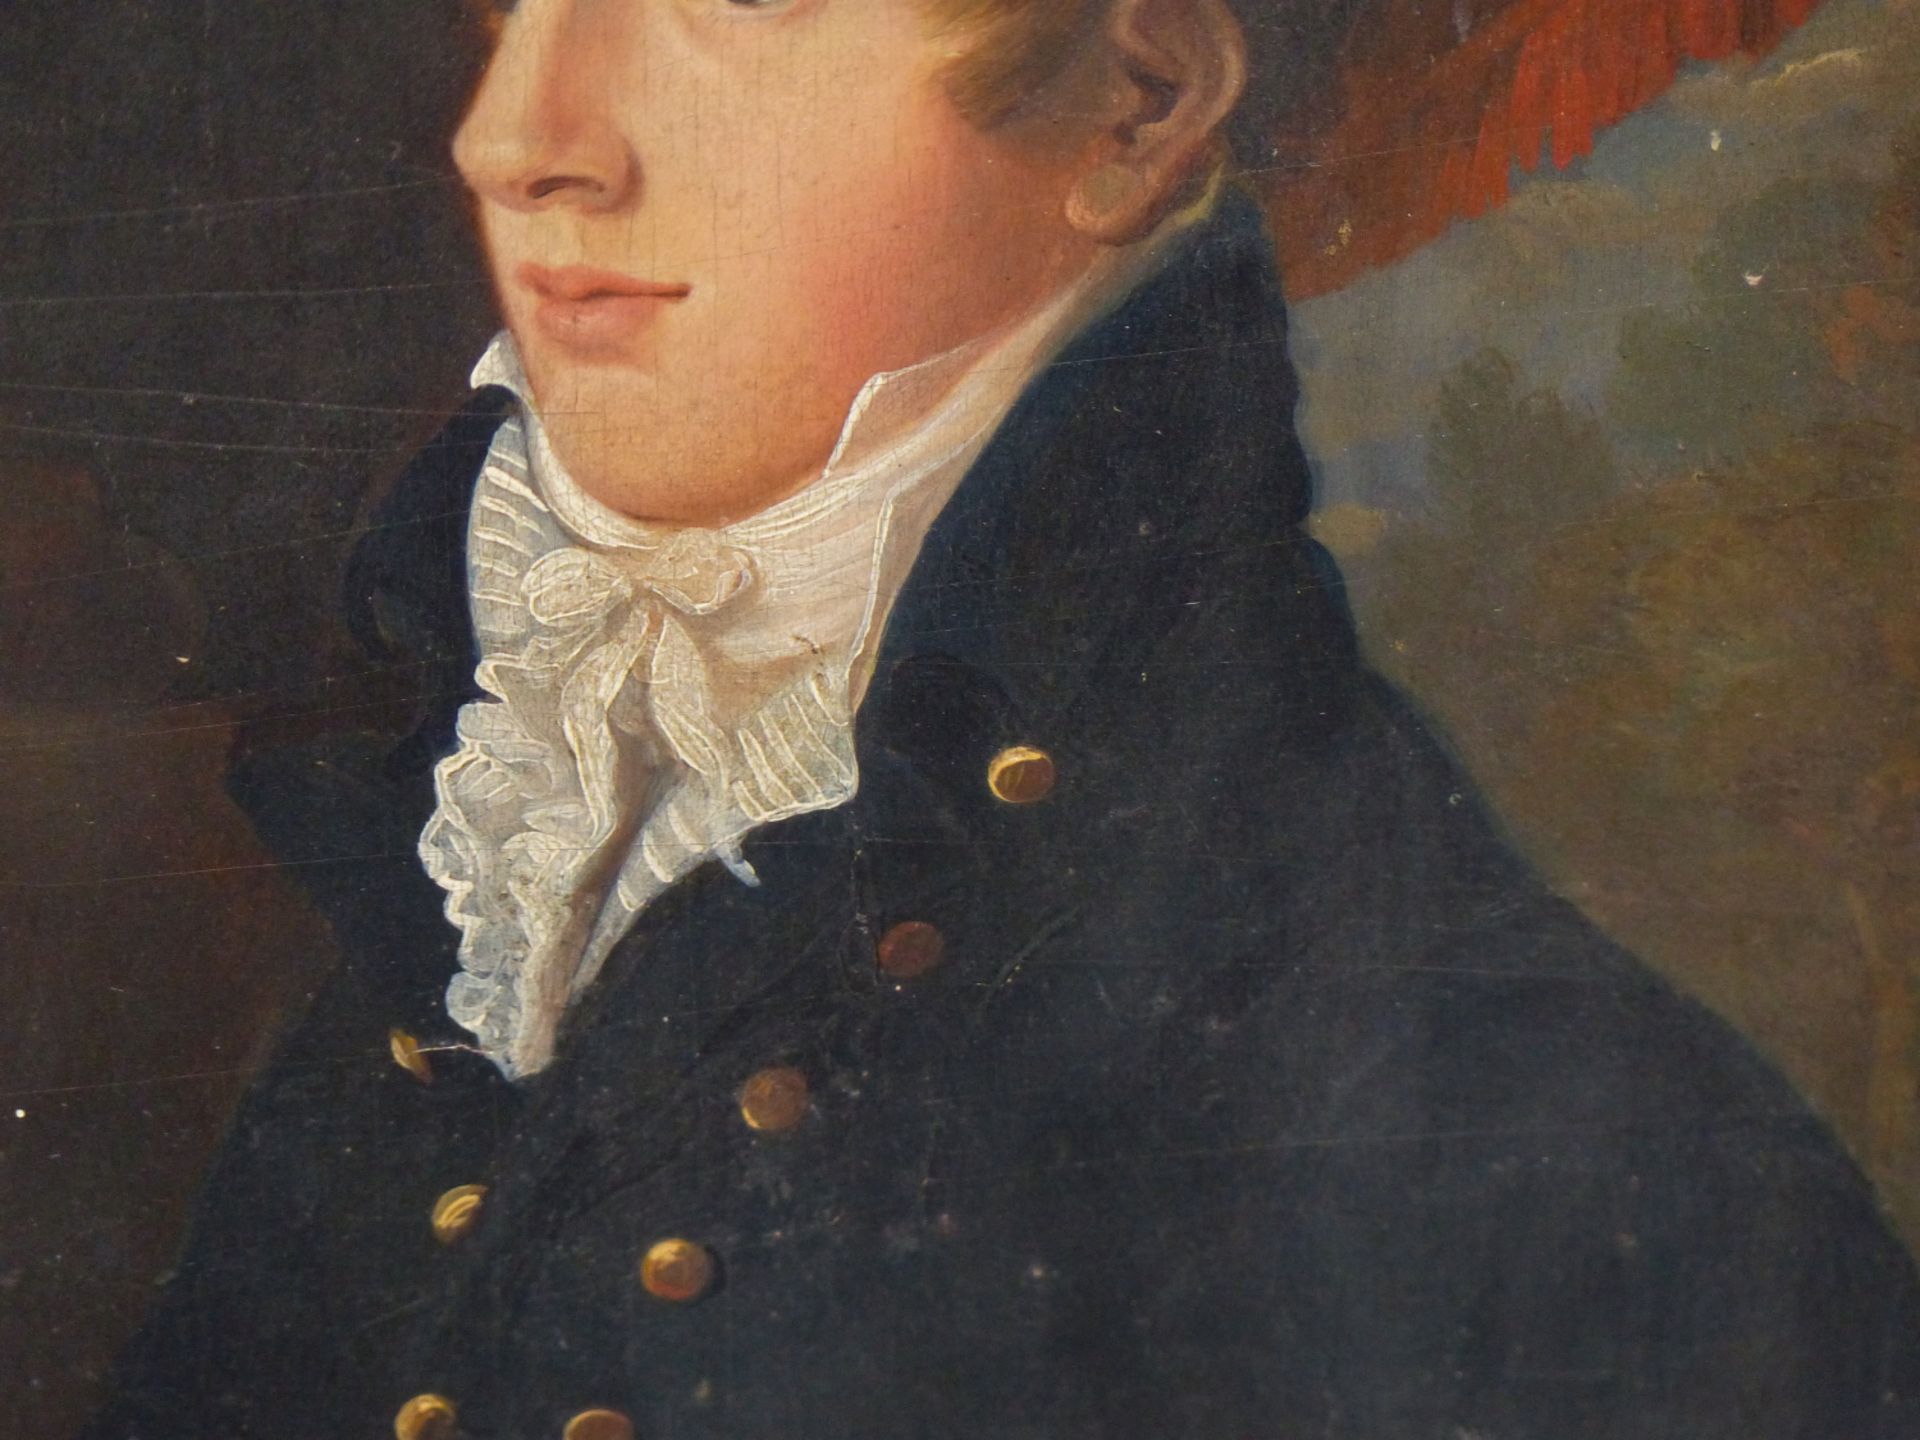 EARLY 19TH CENTURY ENGLISH SCHOOL, PORTRAIT OF A YOUNG GENTLEMAN, OIL ON PANEL. 21 X 28 cm. - Image 6 of 11